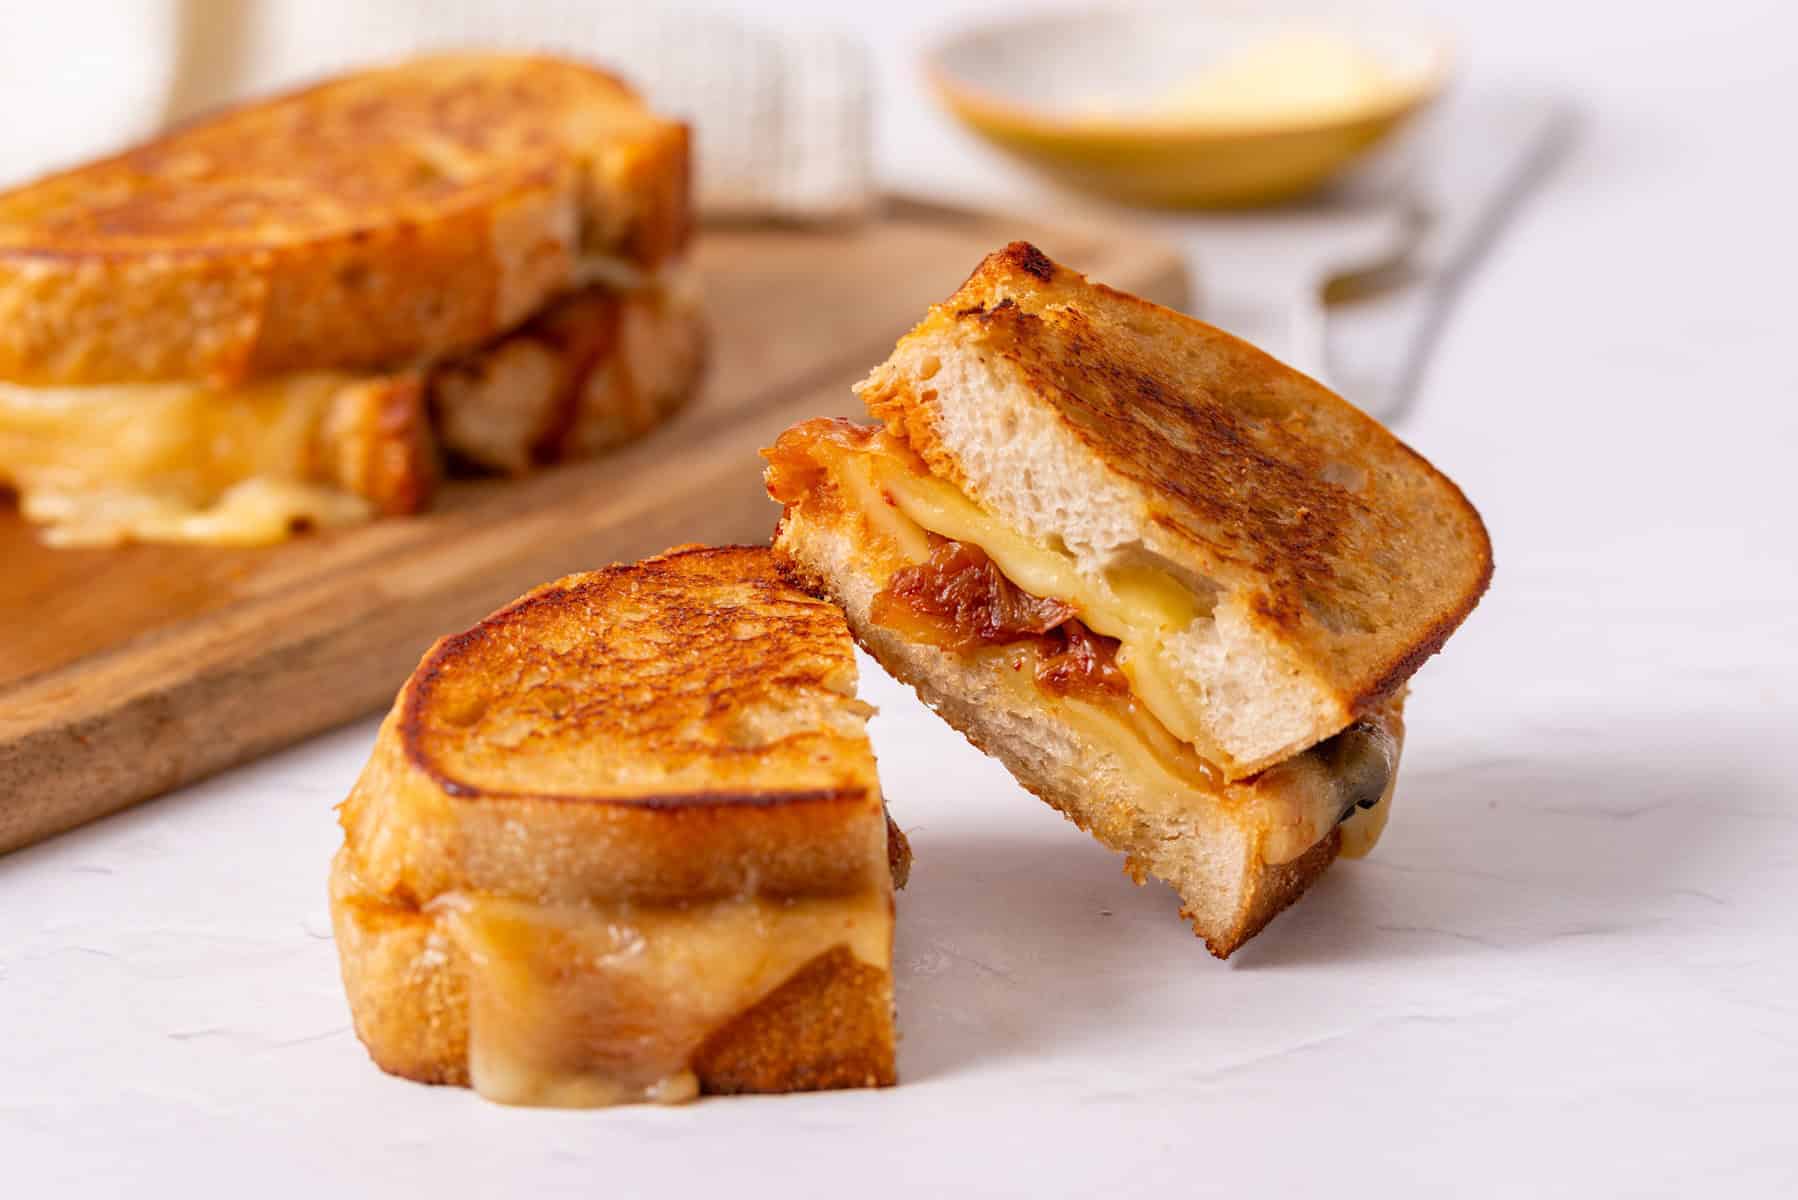 An image of a sliced kimchi grilled cheese sandwich resting on the other slice.